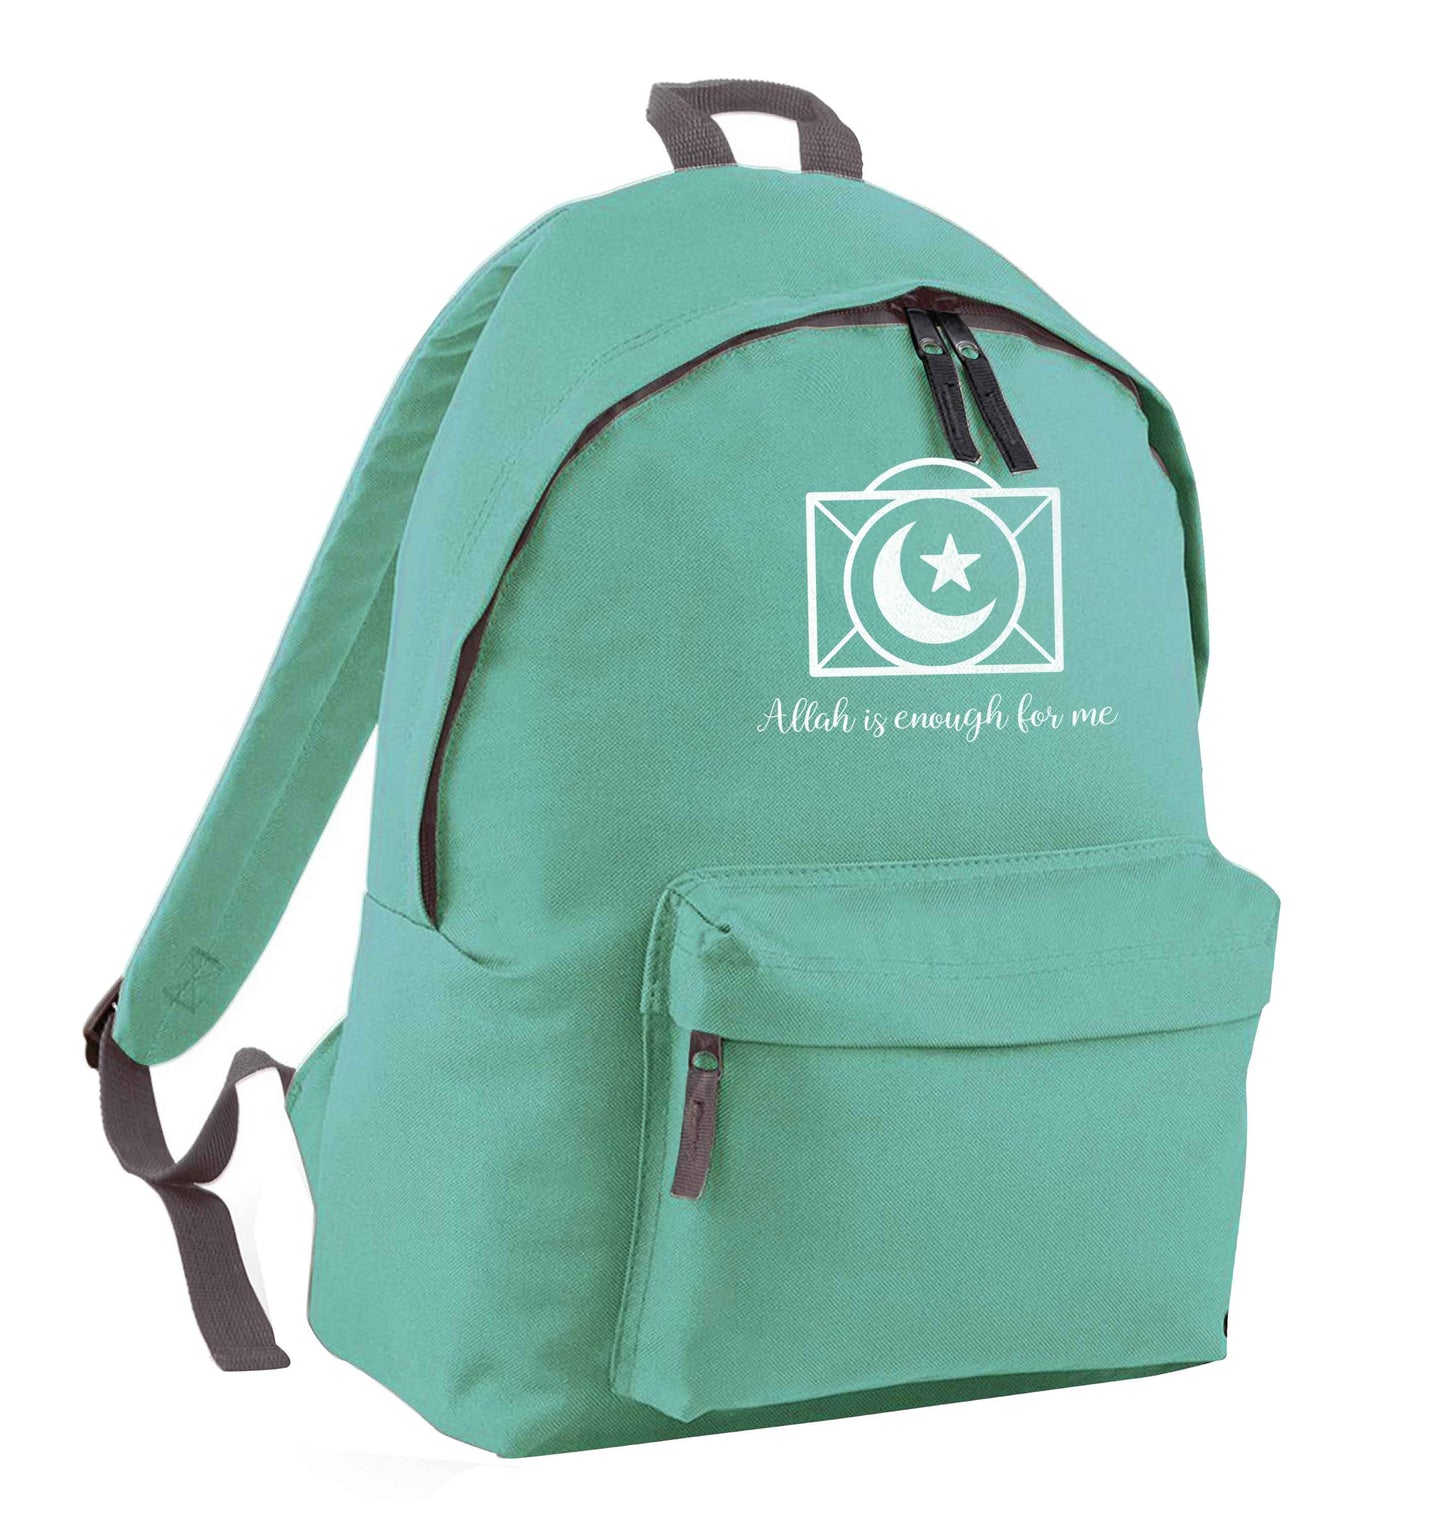 Allah is enough for me mint adults backpack